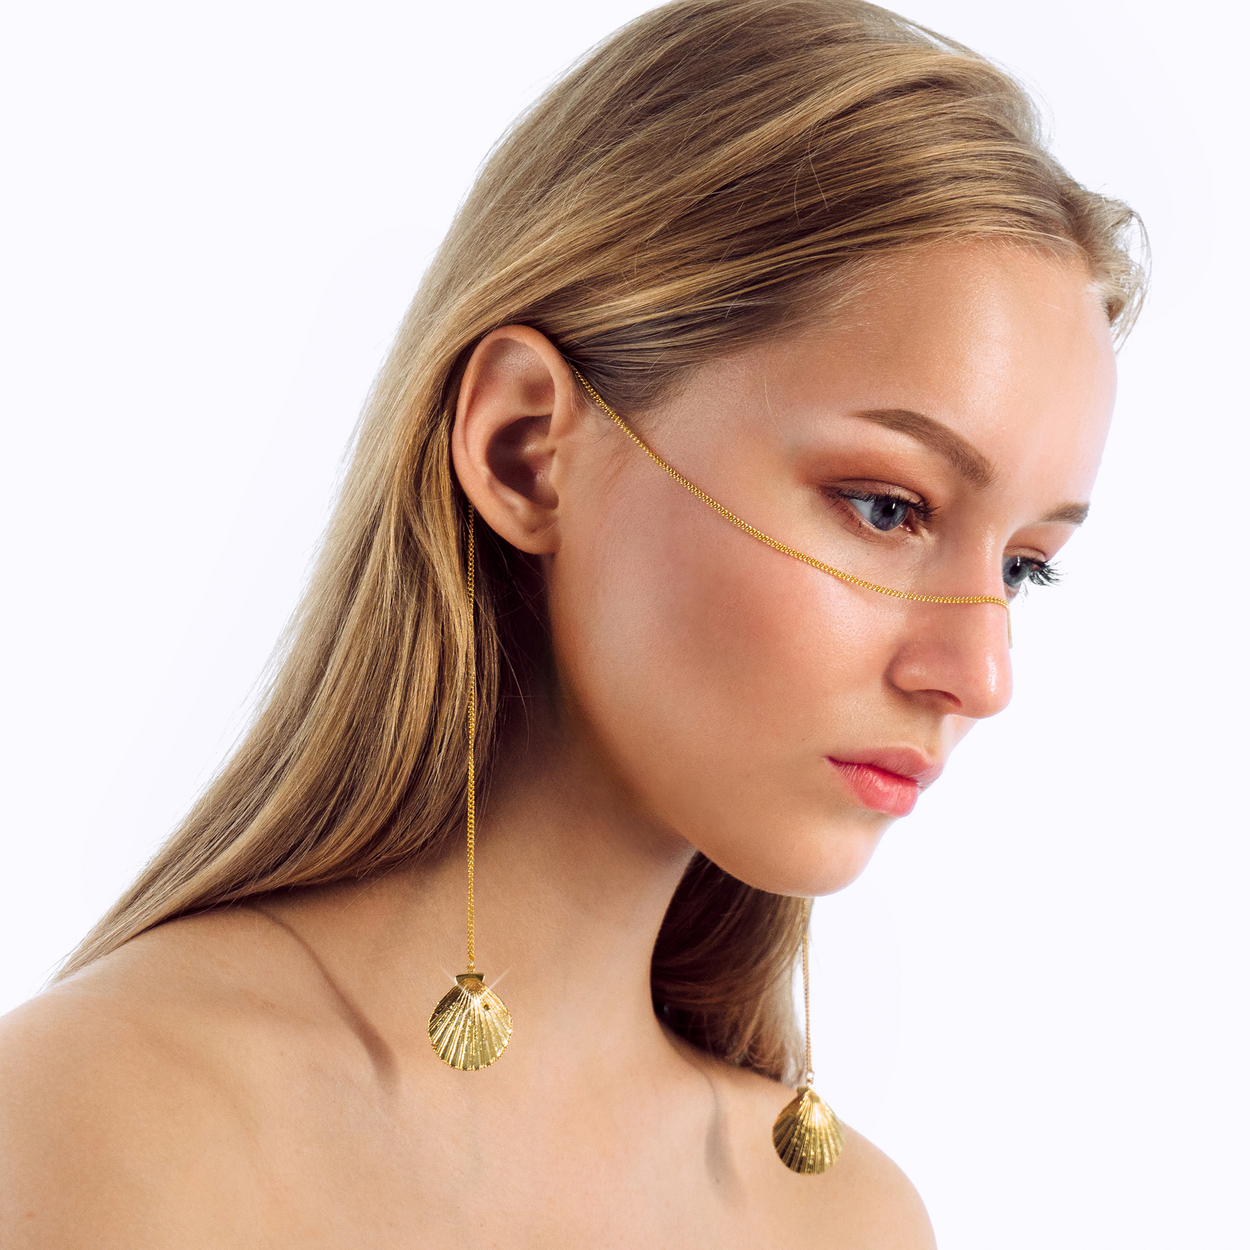 Salacia Catena | Face Chain | Face Jewelry | 24k Gold Plated with Sea Shells | Lemuria Collection